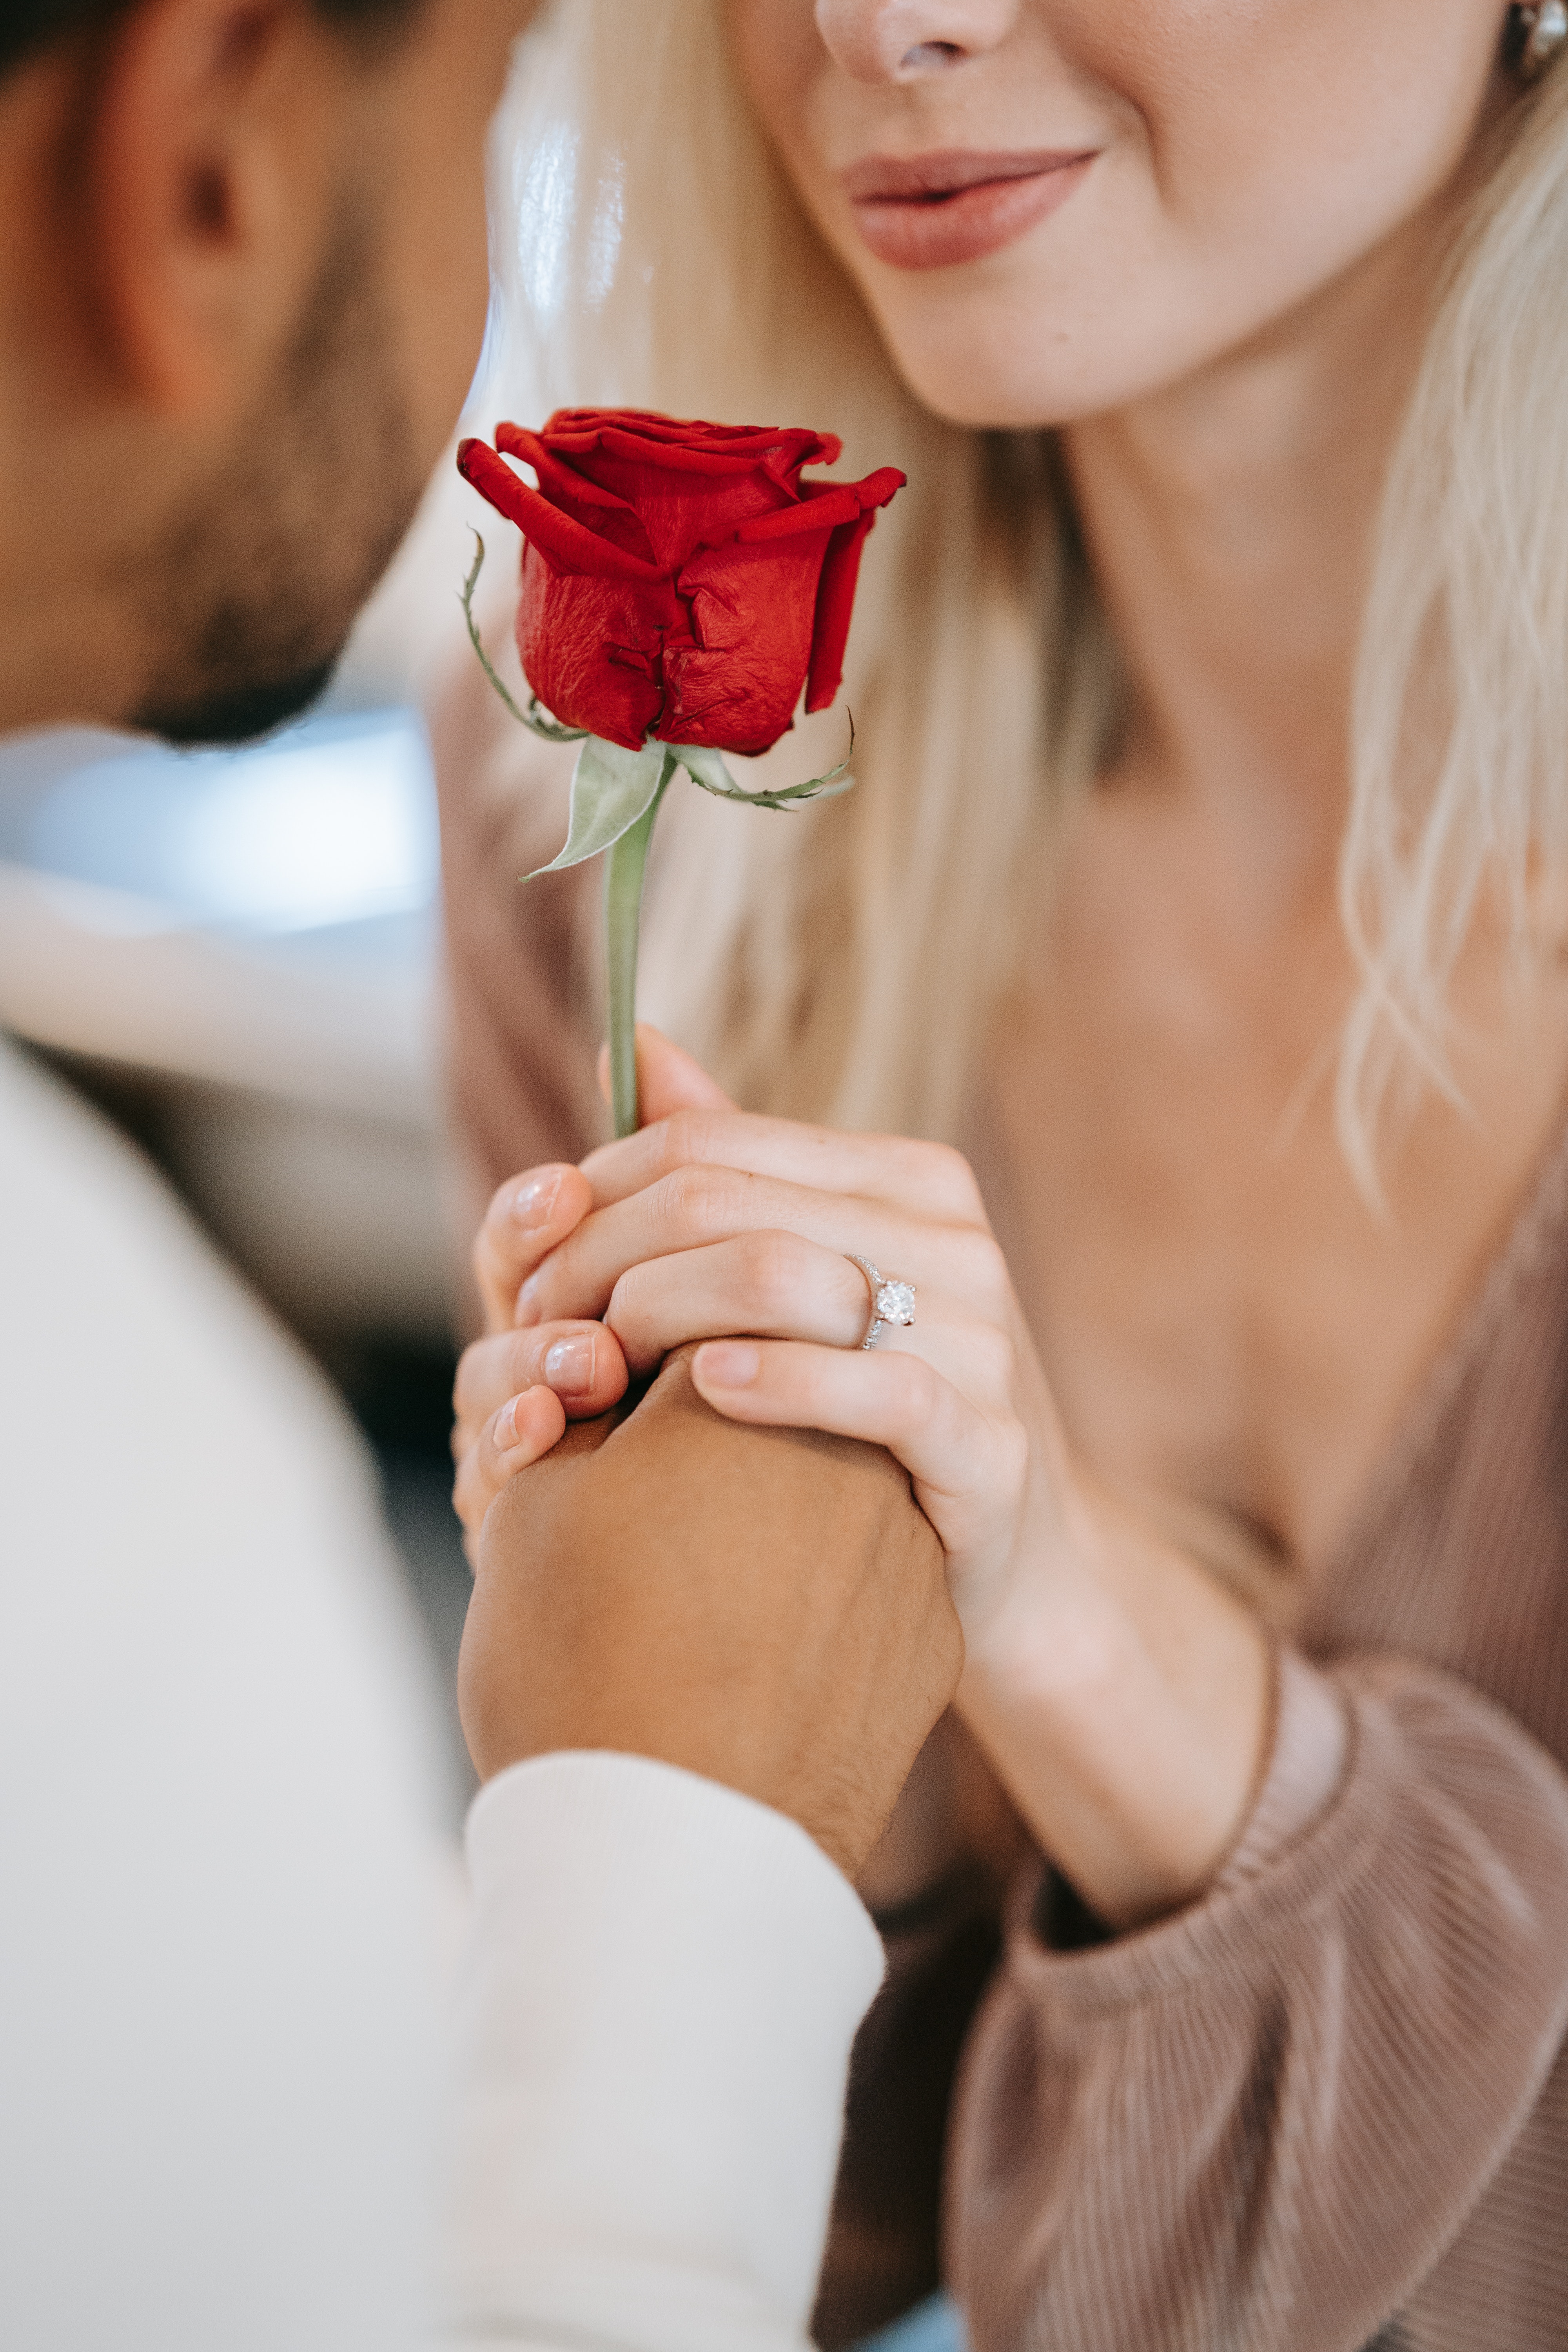 A man handing a red rose to a woman. | Source: Pexels